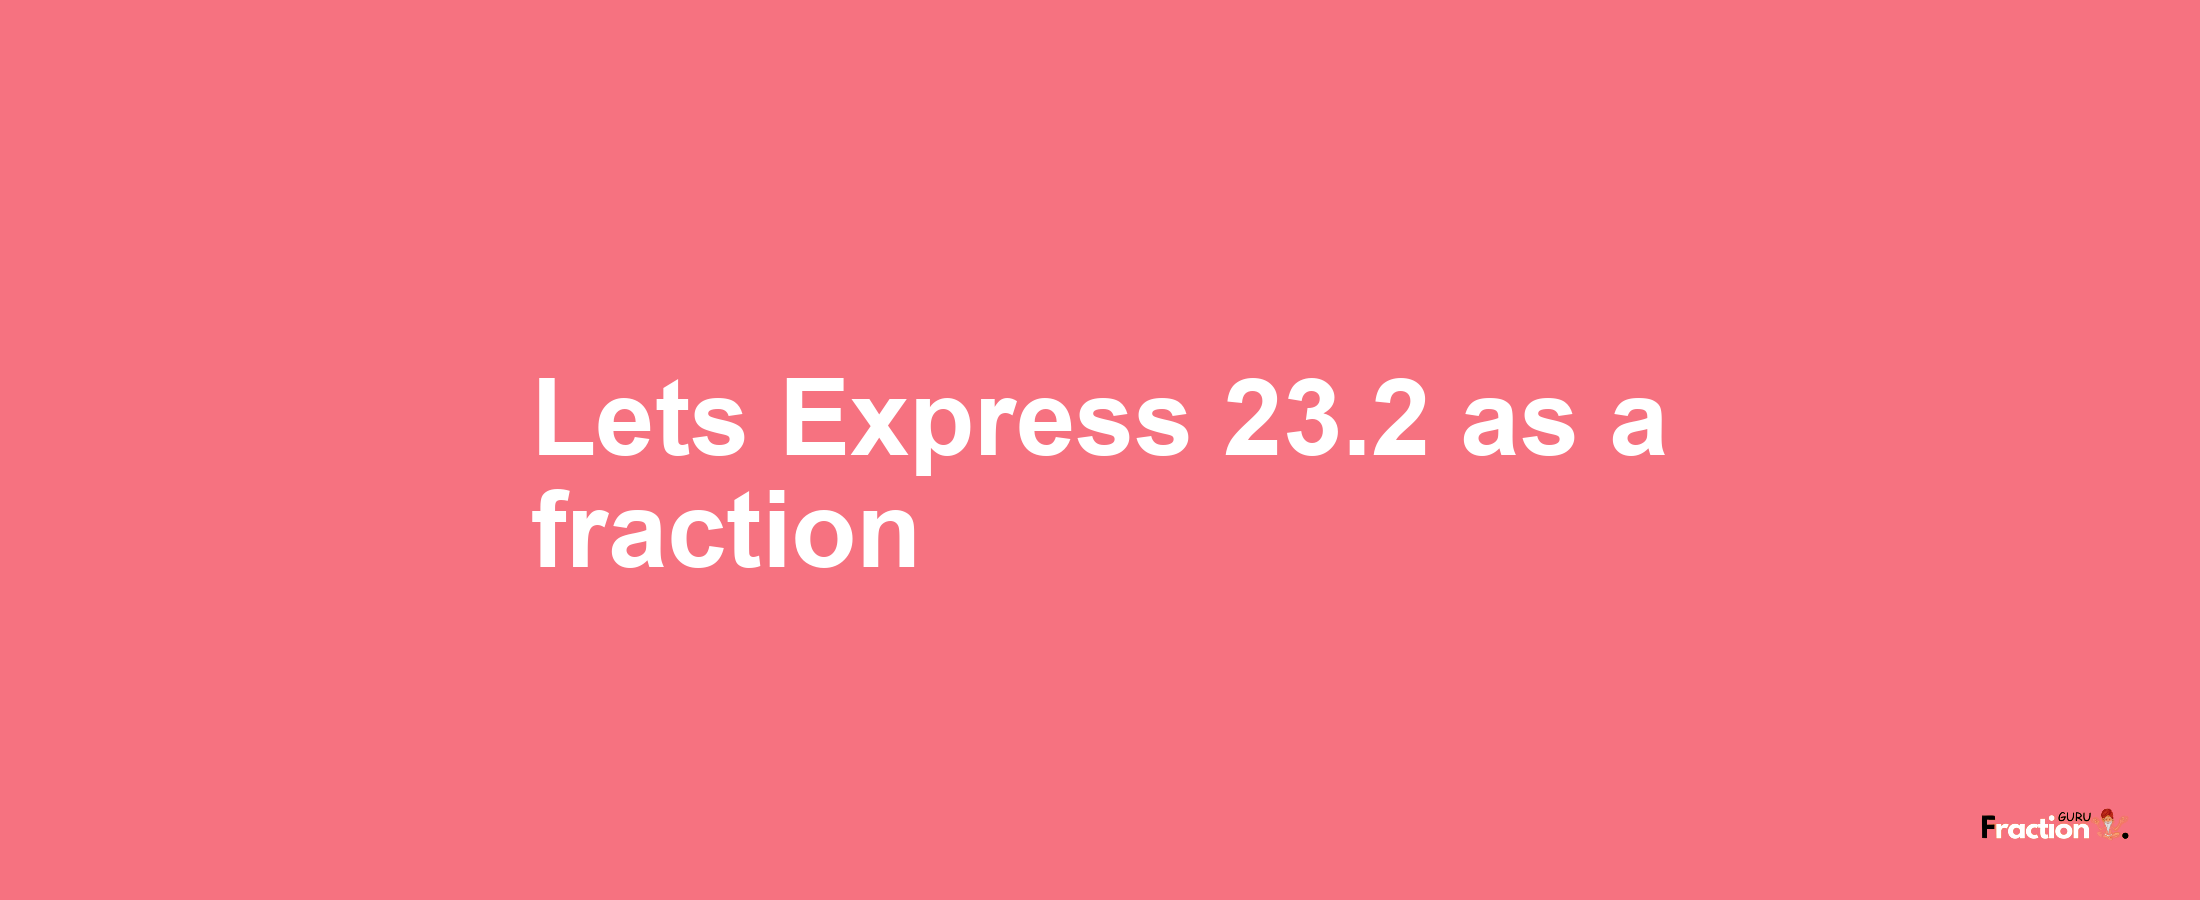 Lets Express 23.2 as afraction